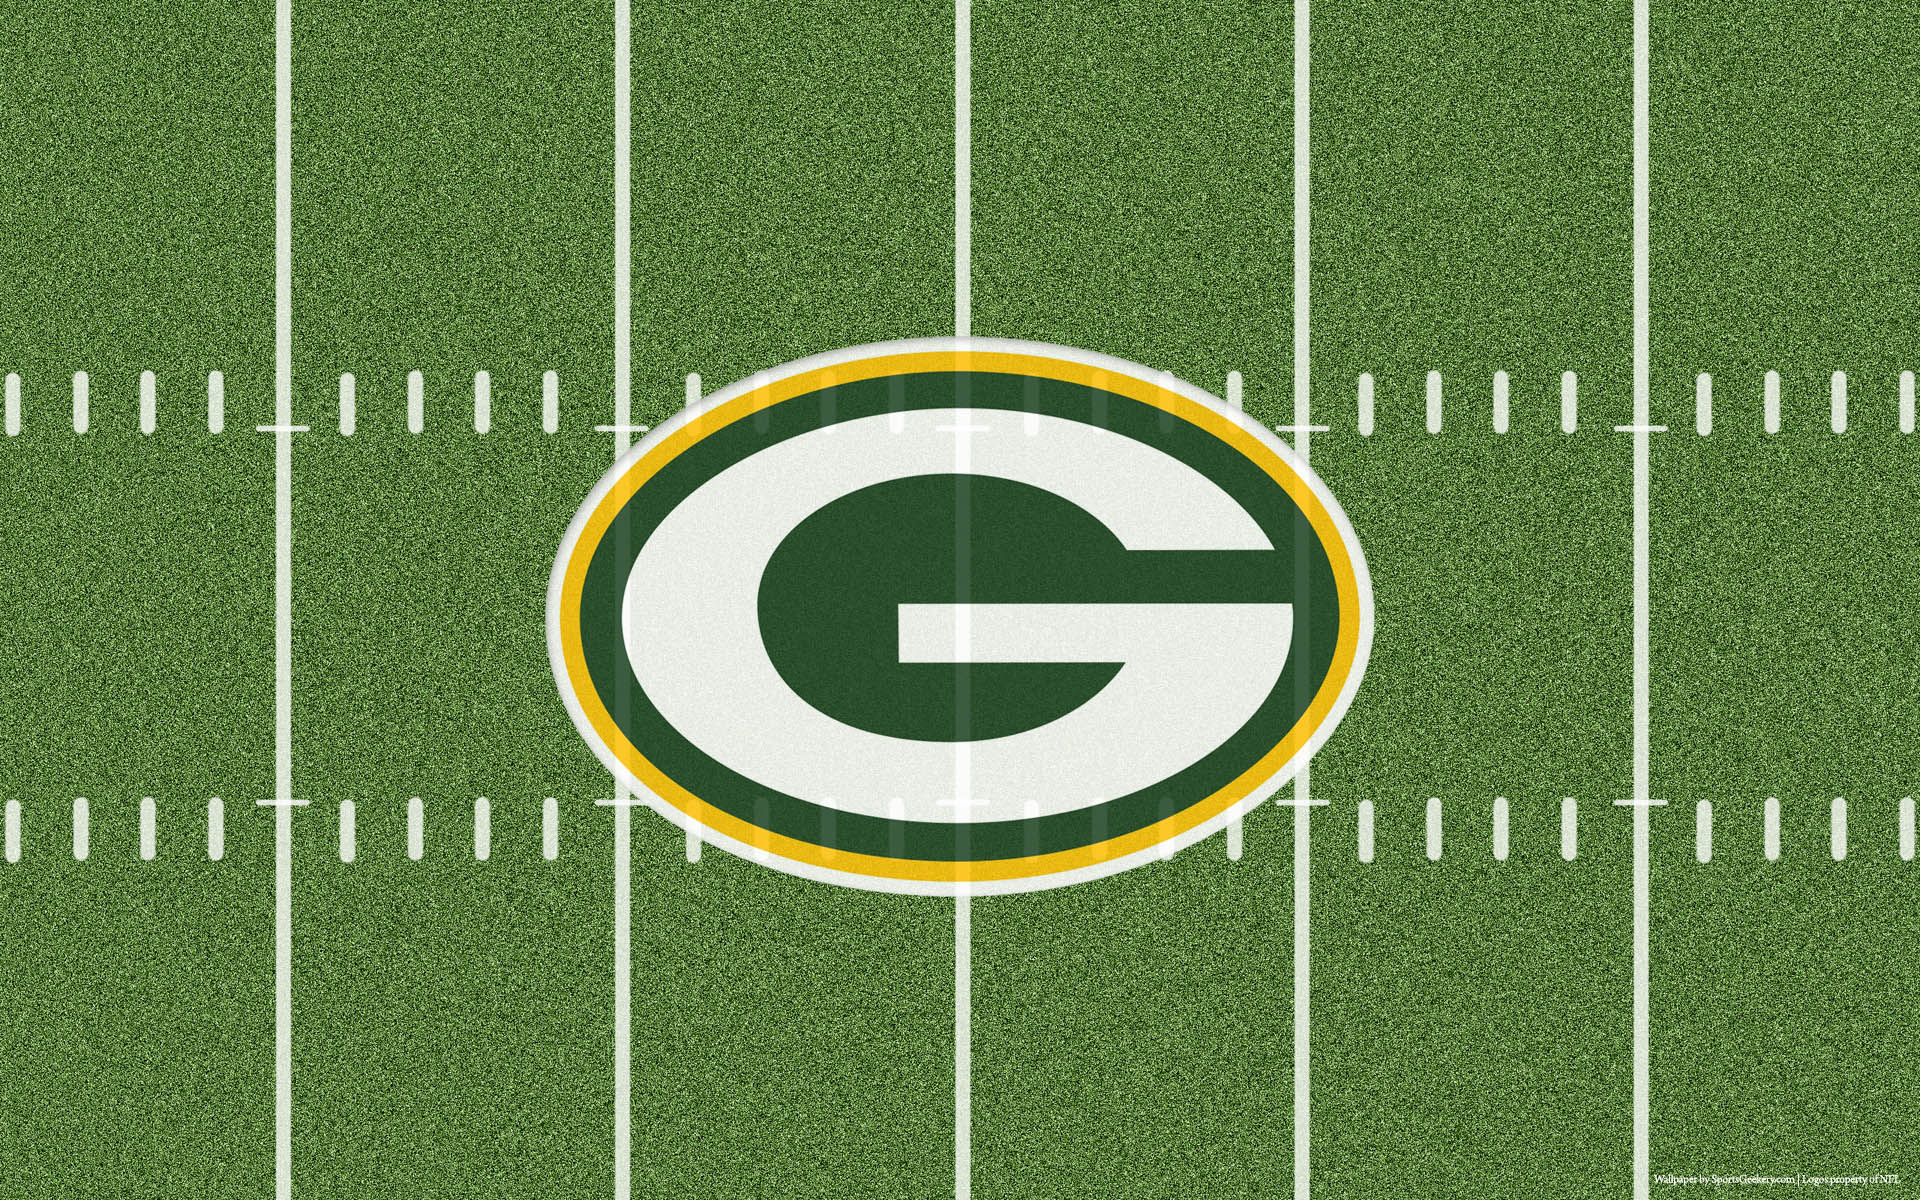 Green Bay Packers Nfl Football R Wallpaper Background